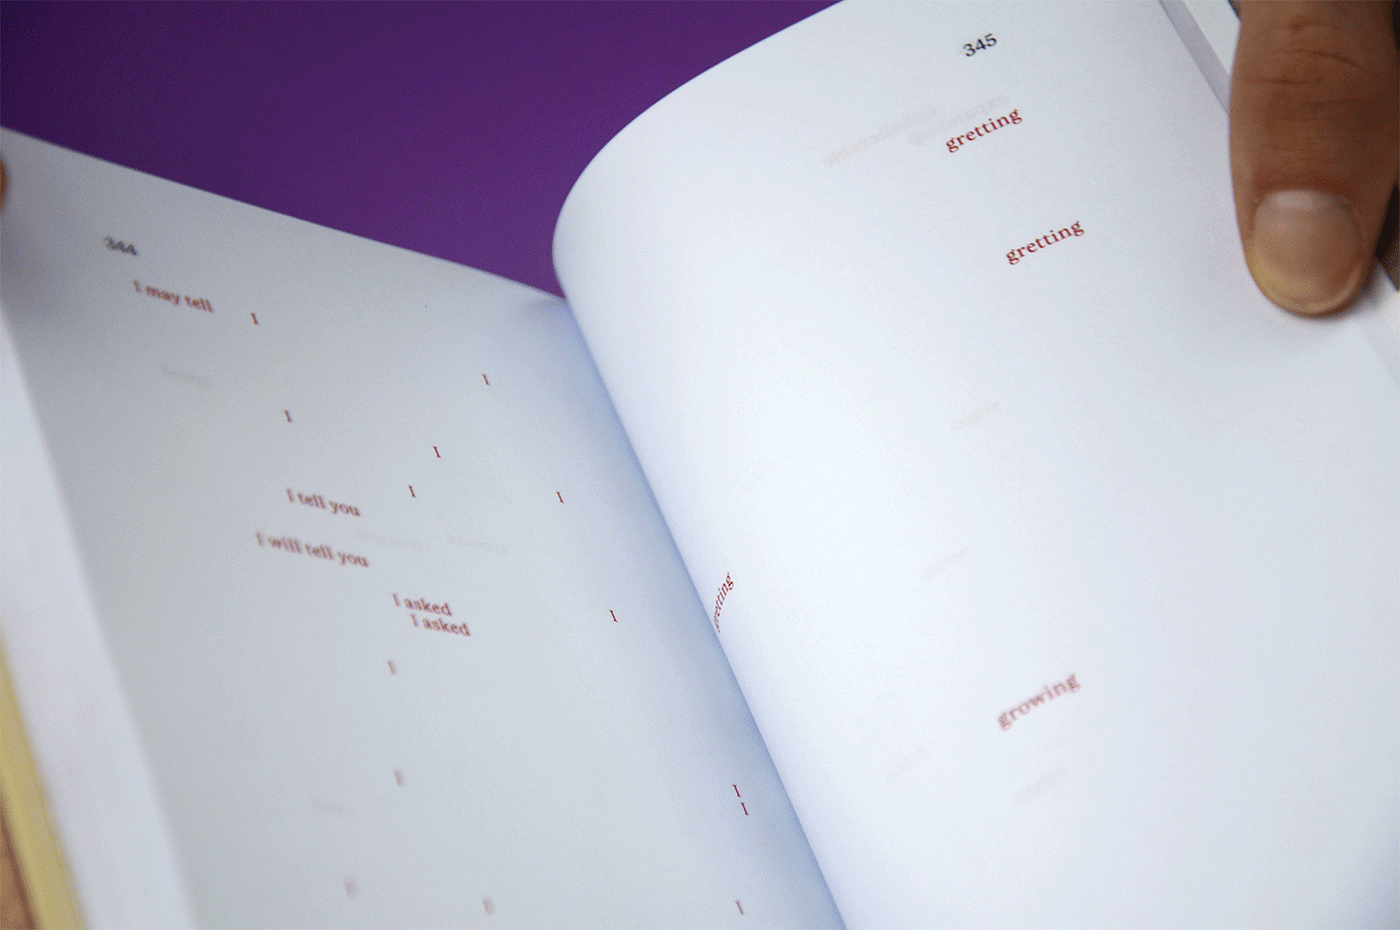 palimpseste concrete poetry editorial artist's books Exhibition  Facsimile humument Tom Phillips Collection collecting